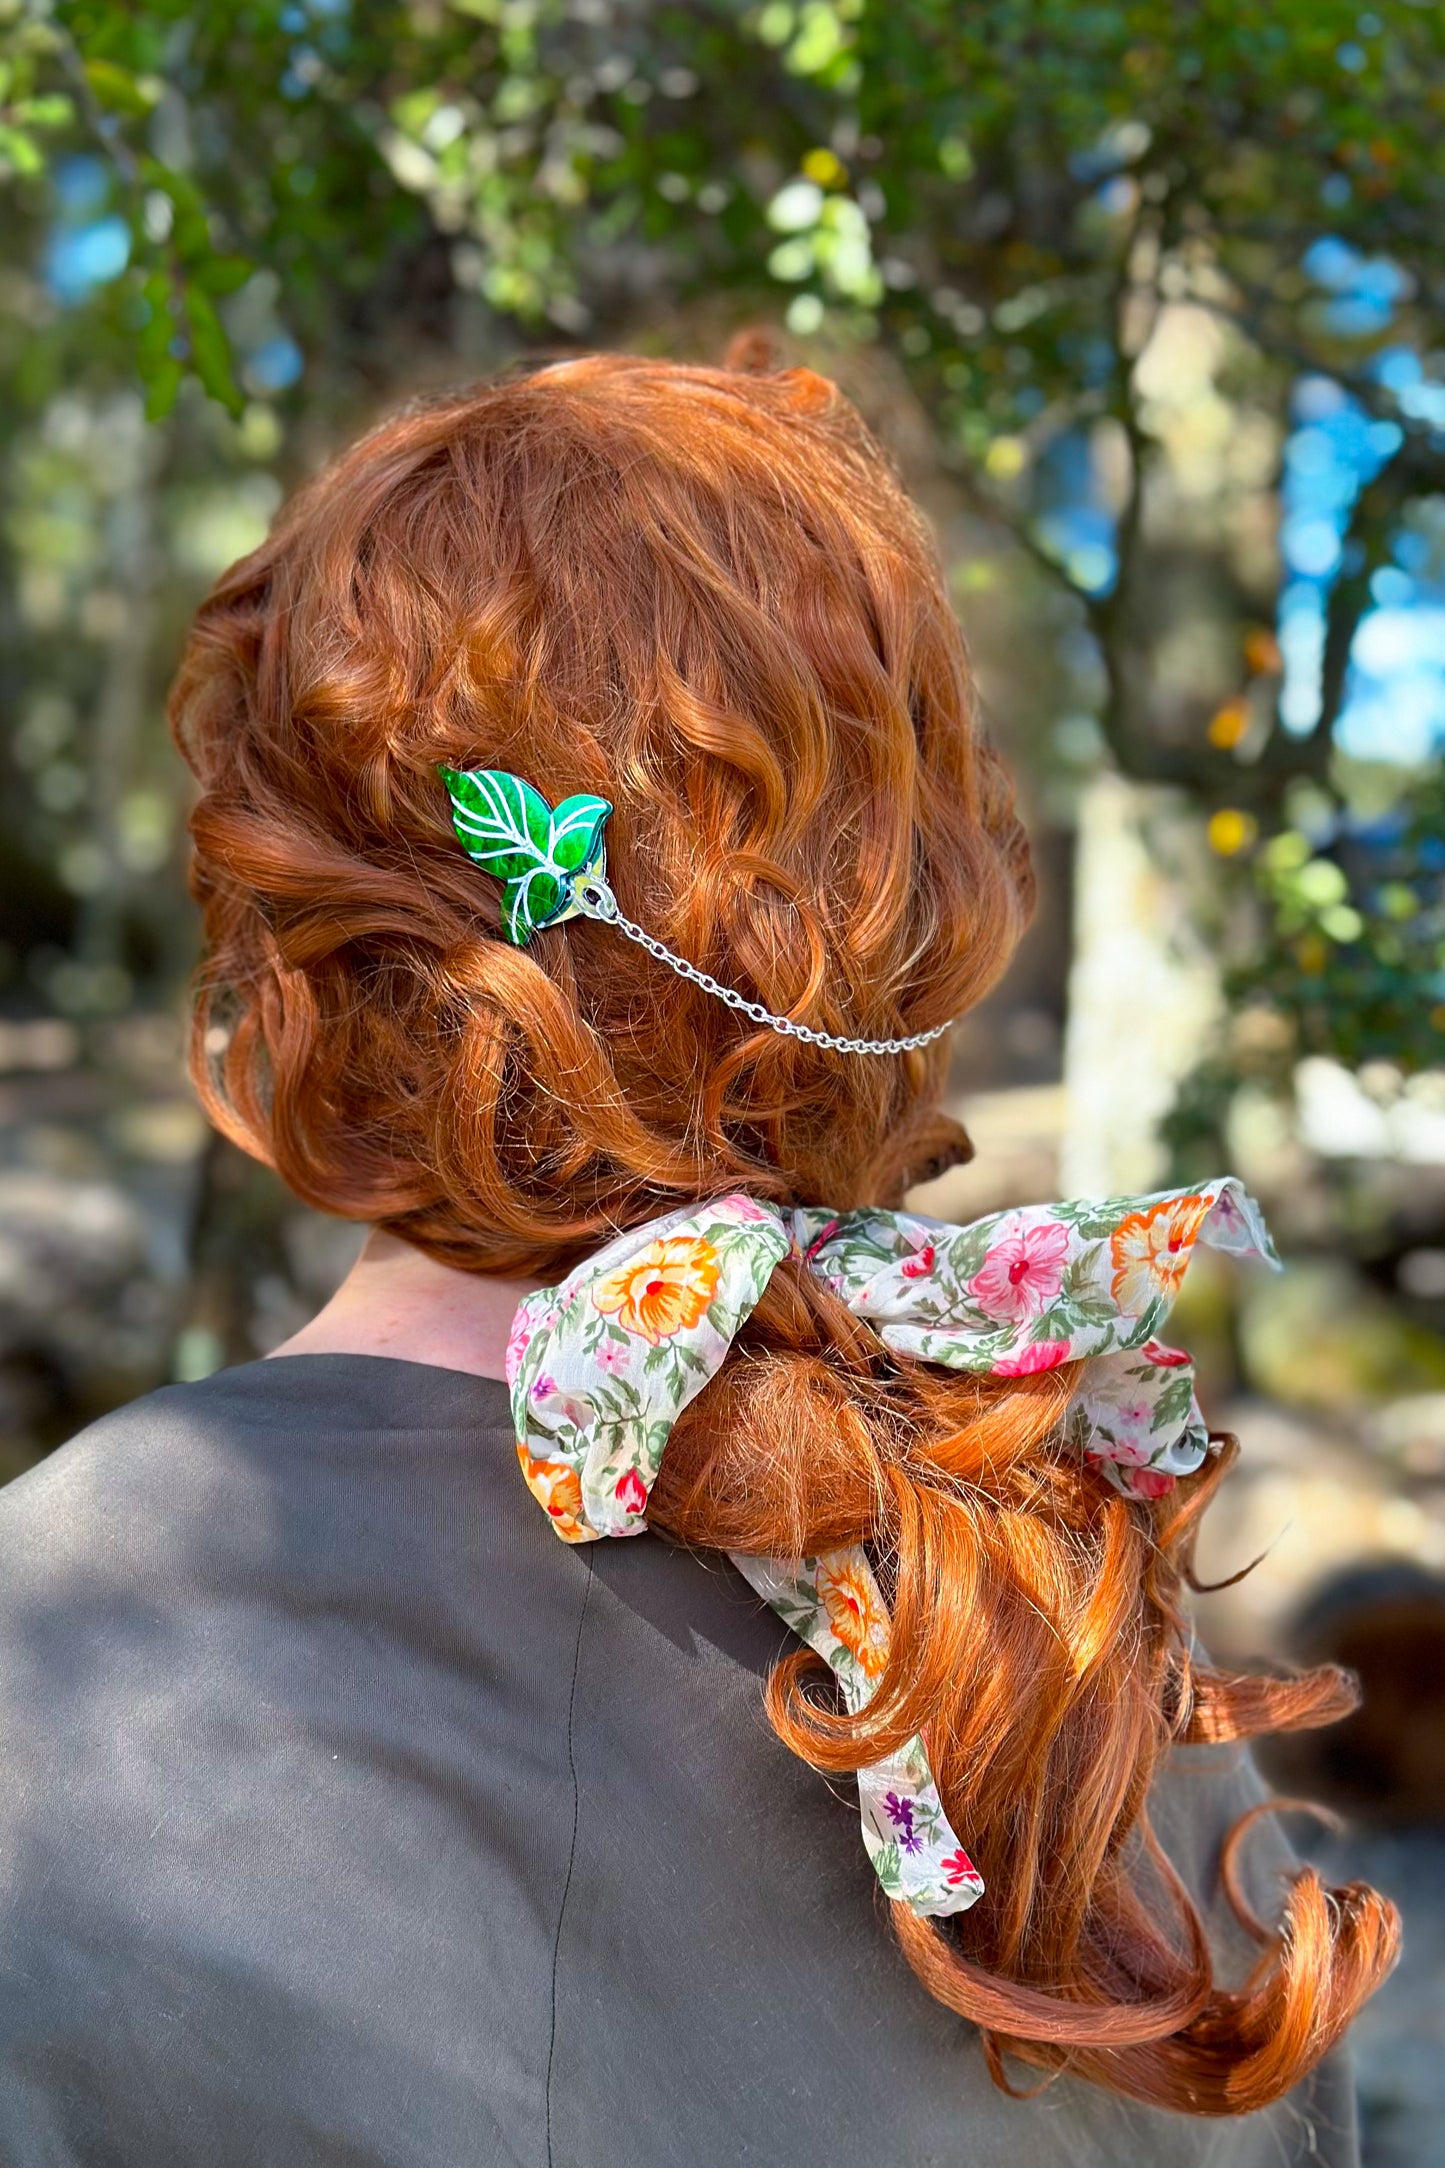 The Halfling's Clasp - Collar and Hair Clips